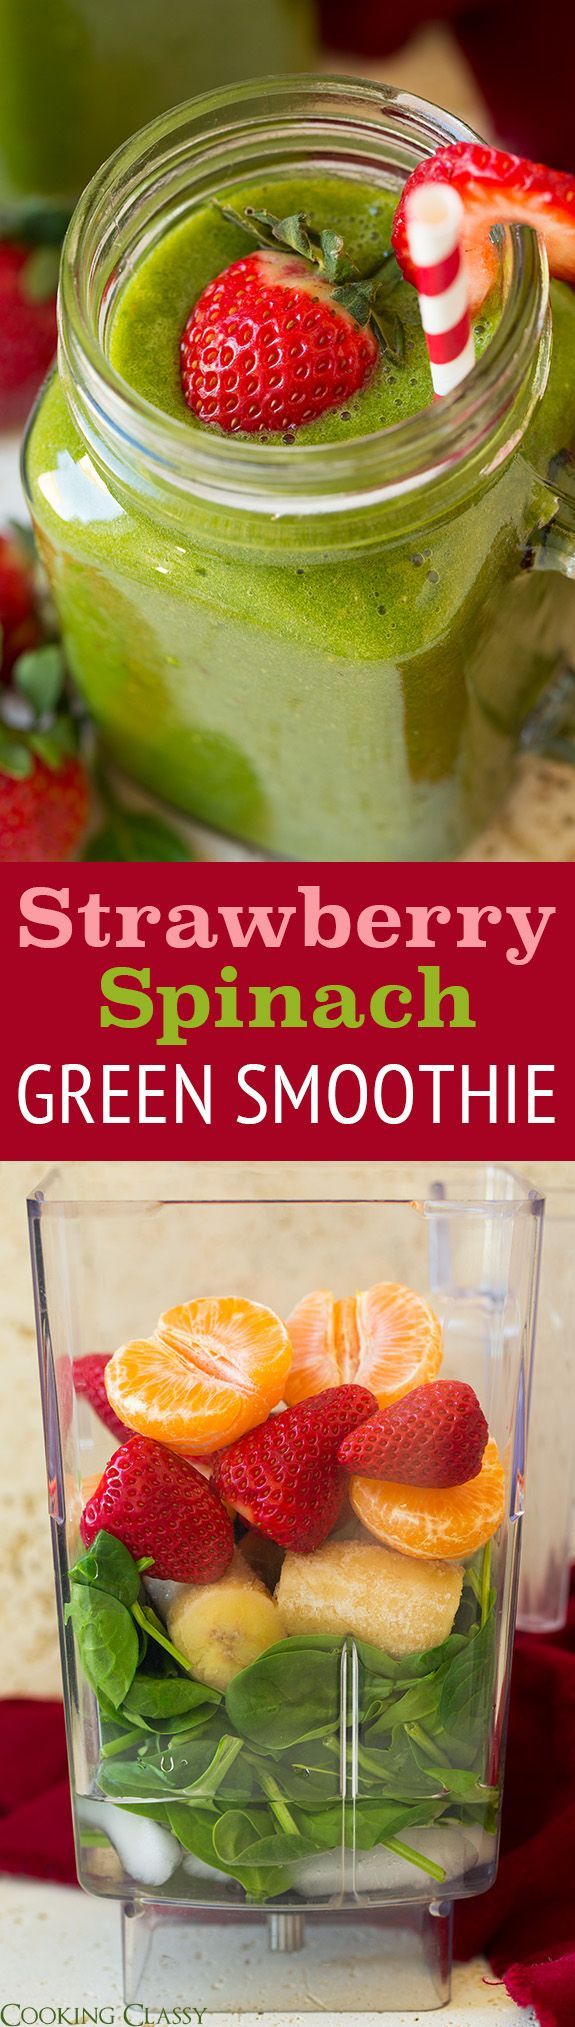 Strawberry Spinach Green Smoothie – this is one of my FAVORITE green smoothies! Packed with spinach but yo